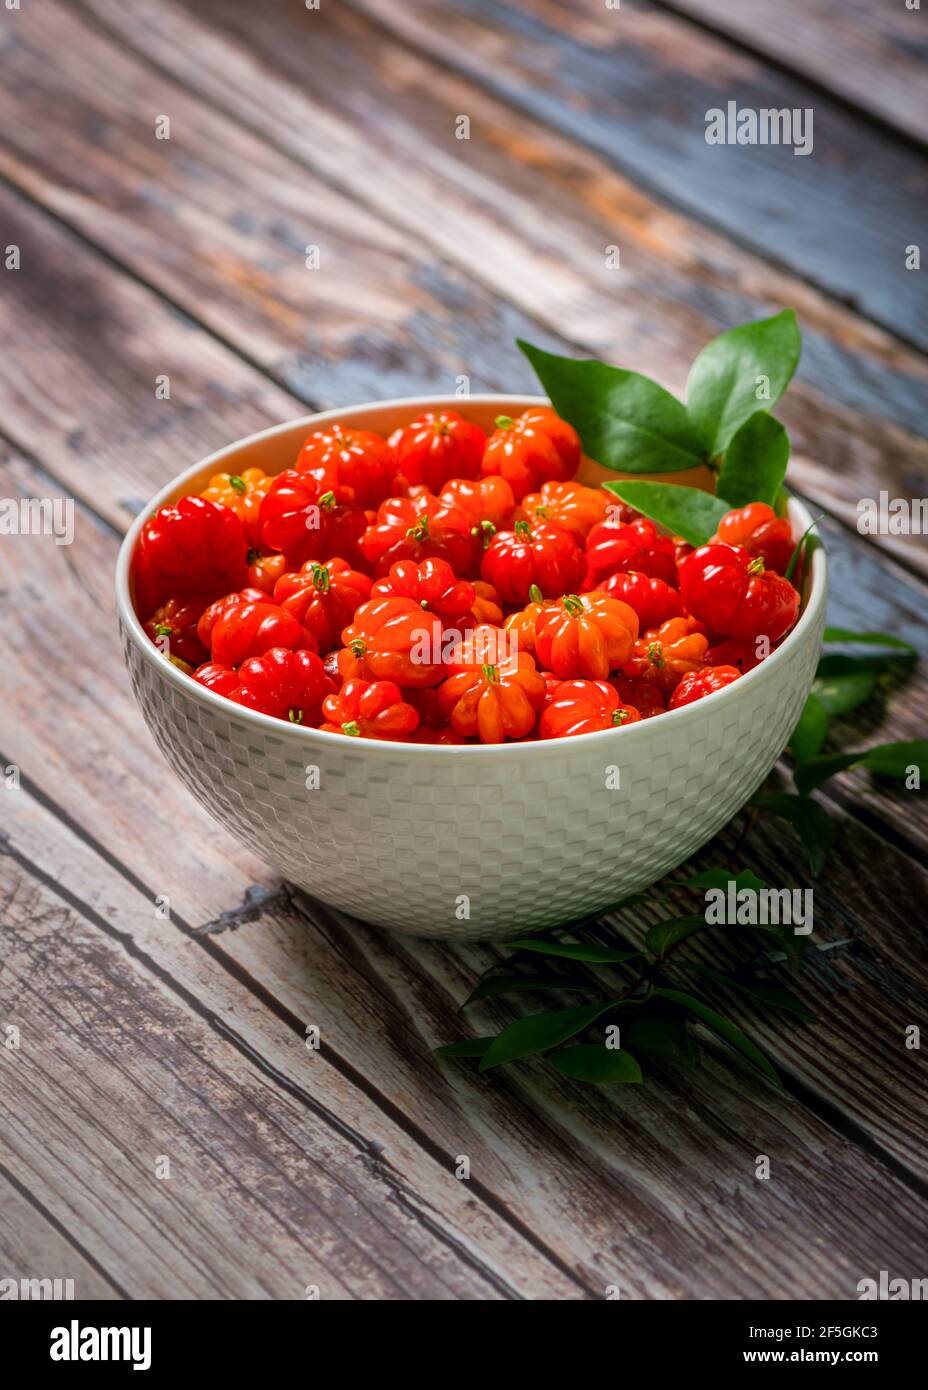 Surinam cherry in a white bowl on a wooden table. Stock Photo